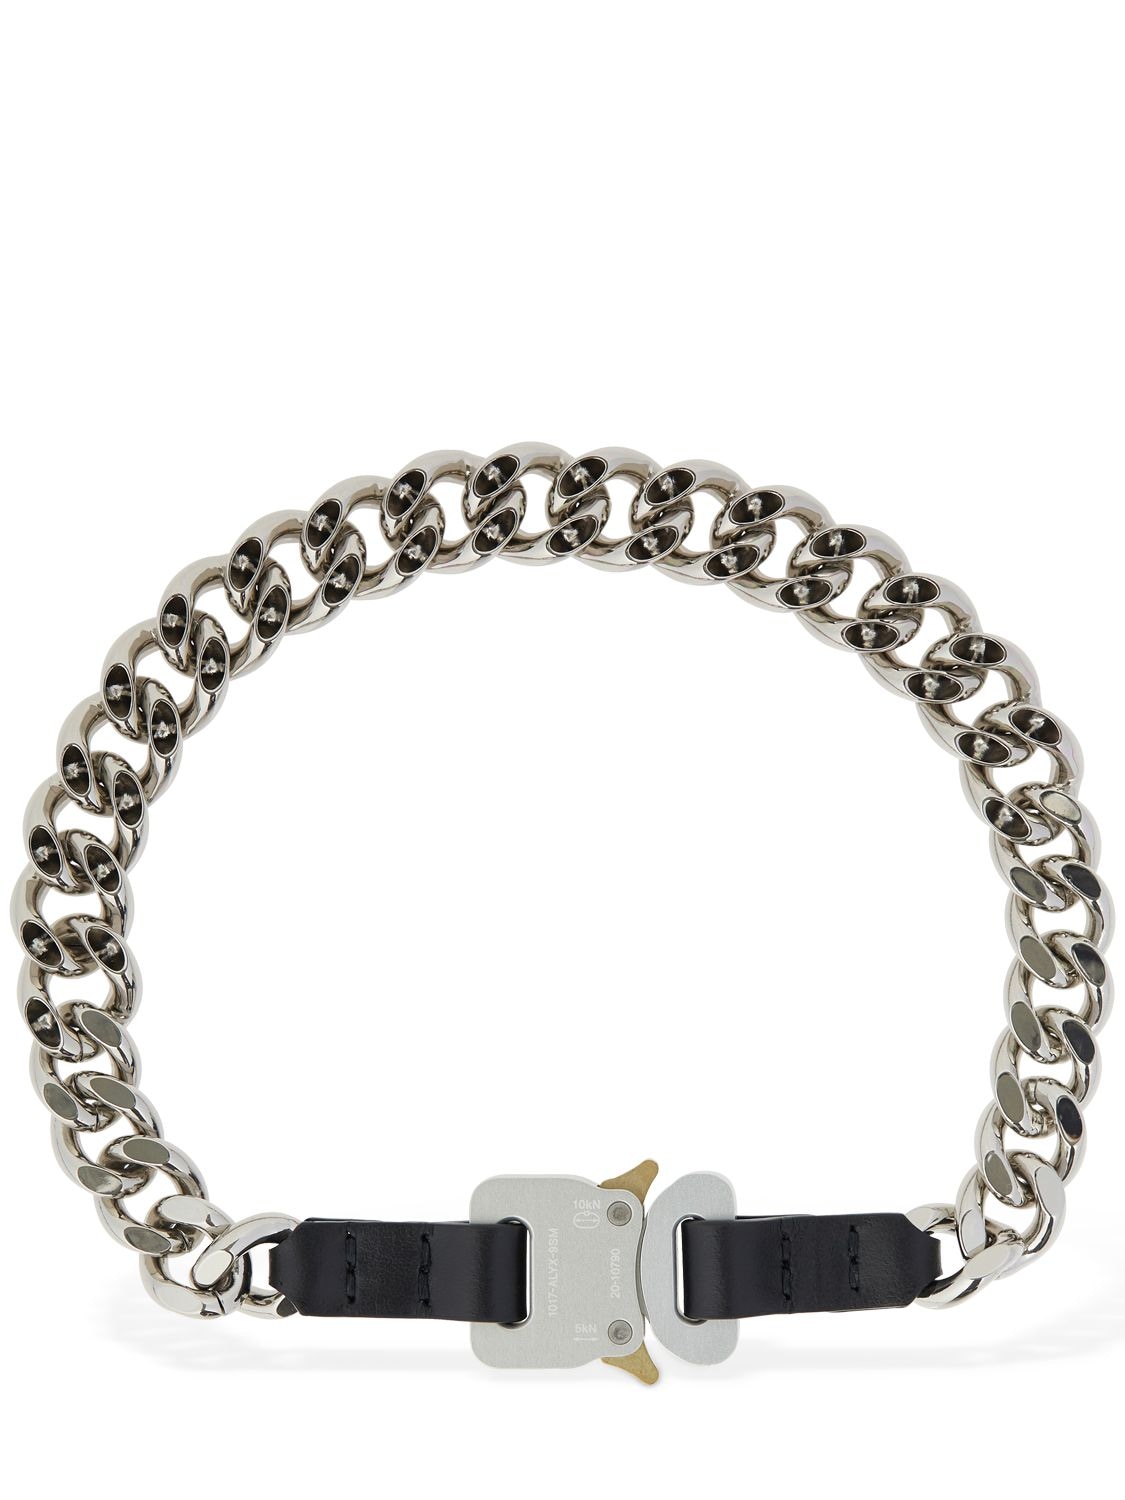 Alyx CHAIN NECKLACE W/ LEATHER DETAILS